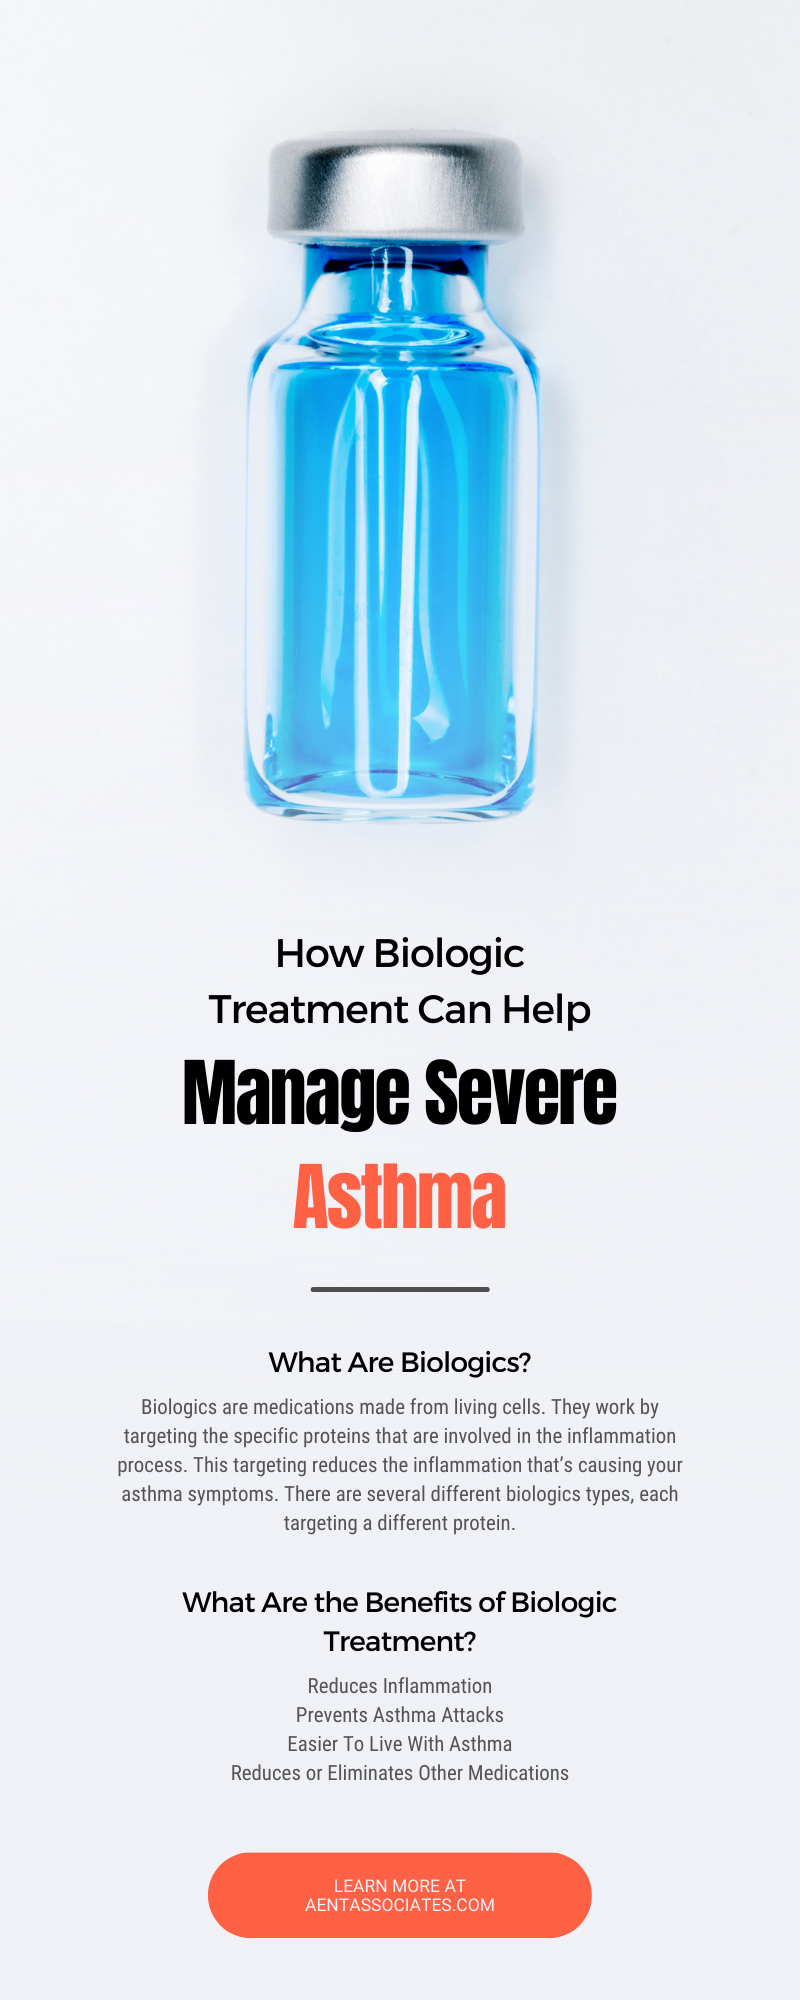 How Biologic Treatment Can Help Manage Severe Asthma